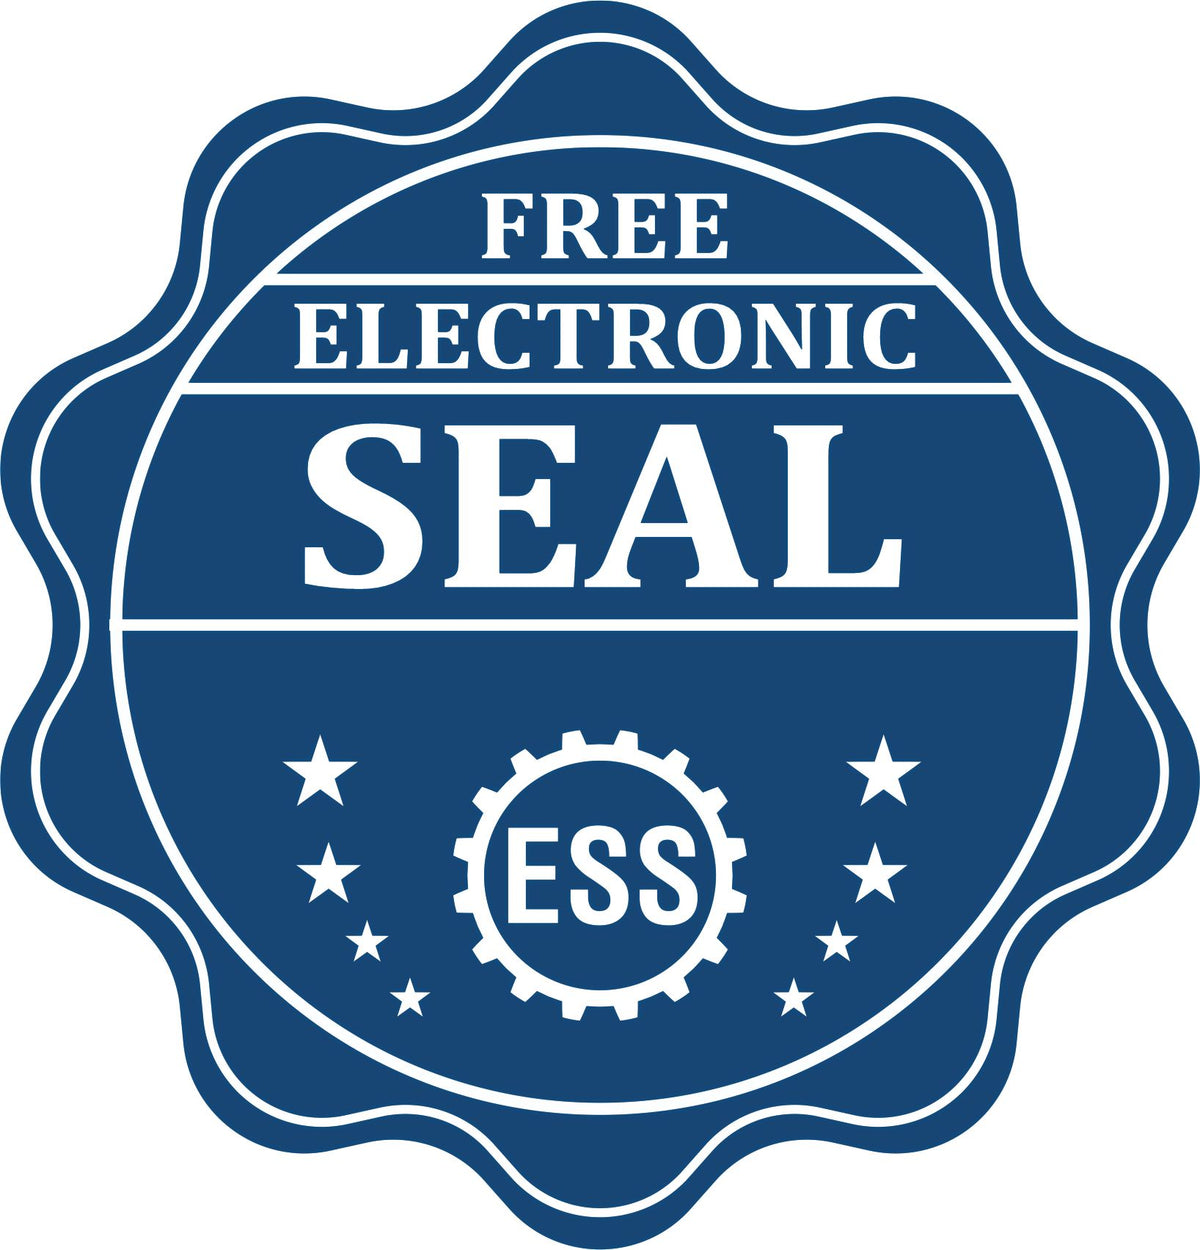 A badge showing a free electronic seal for the Slim Pre-Inked New Jersey Professional Engineer Seal Stamp with stars and the ESS gear on the emblem.